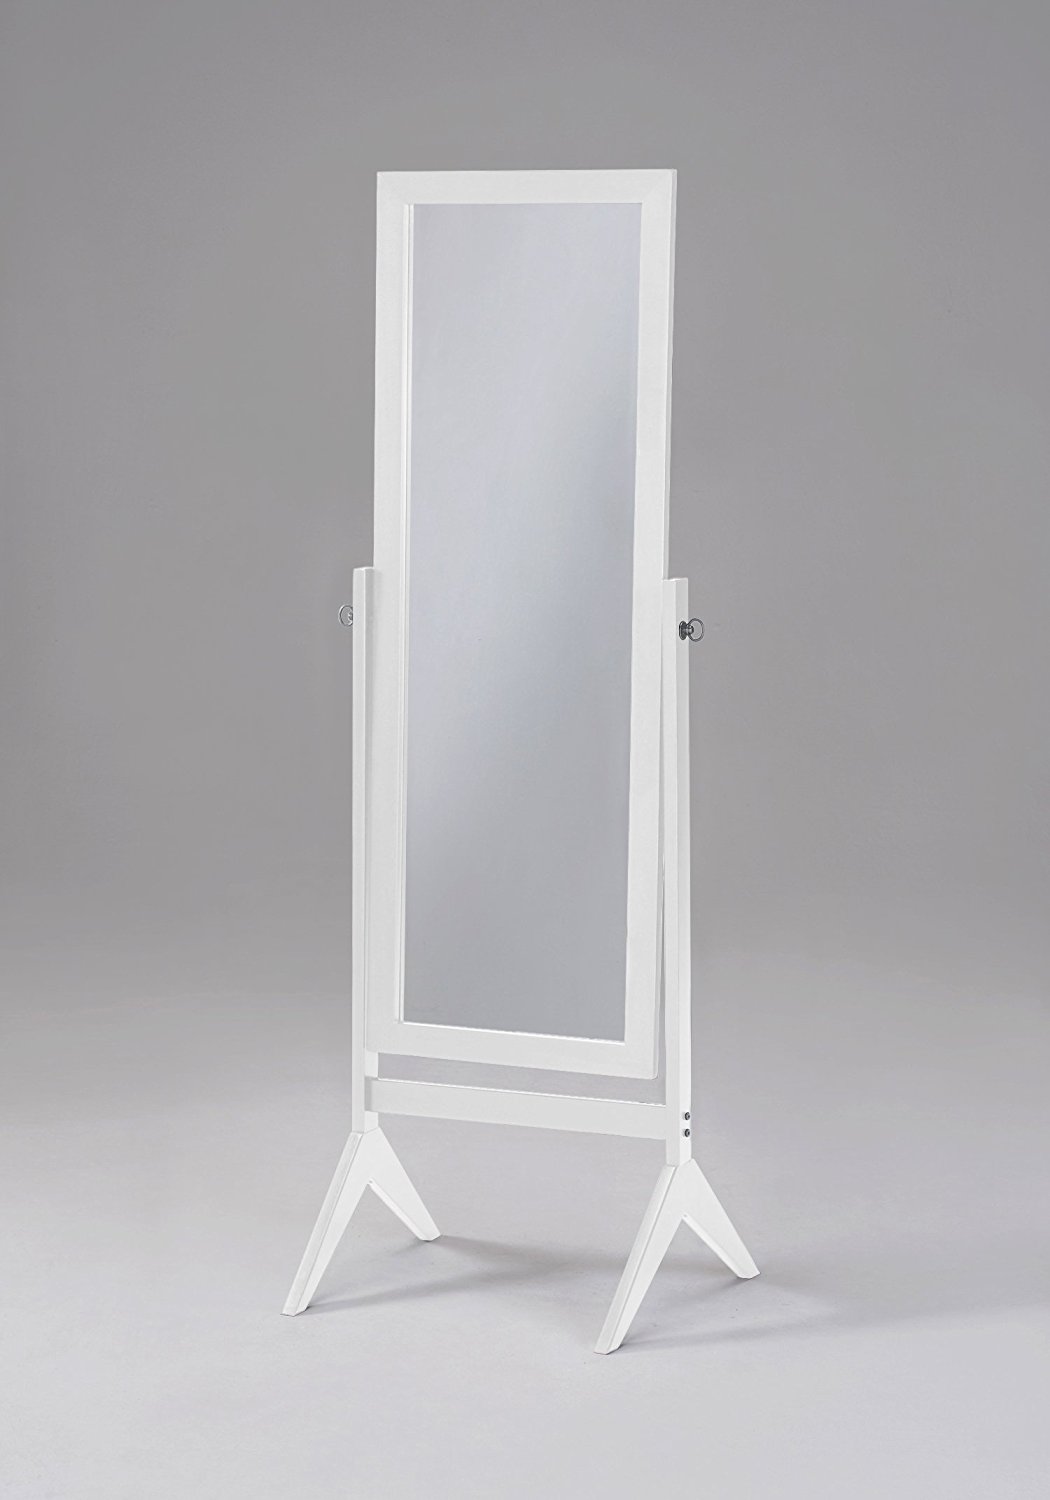 White Finish Wooden Cheval Bedroom Free Standing Floor Mirror (Cheval White) by eHomeProducts